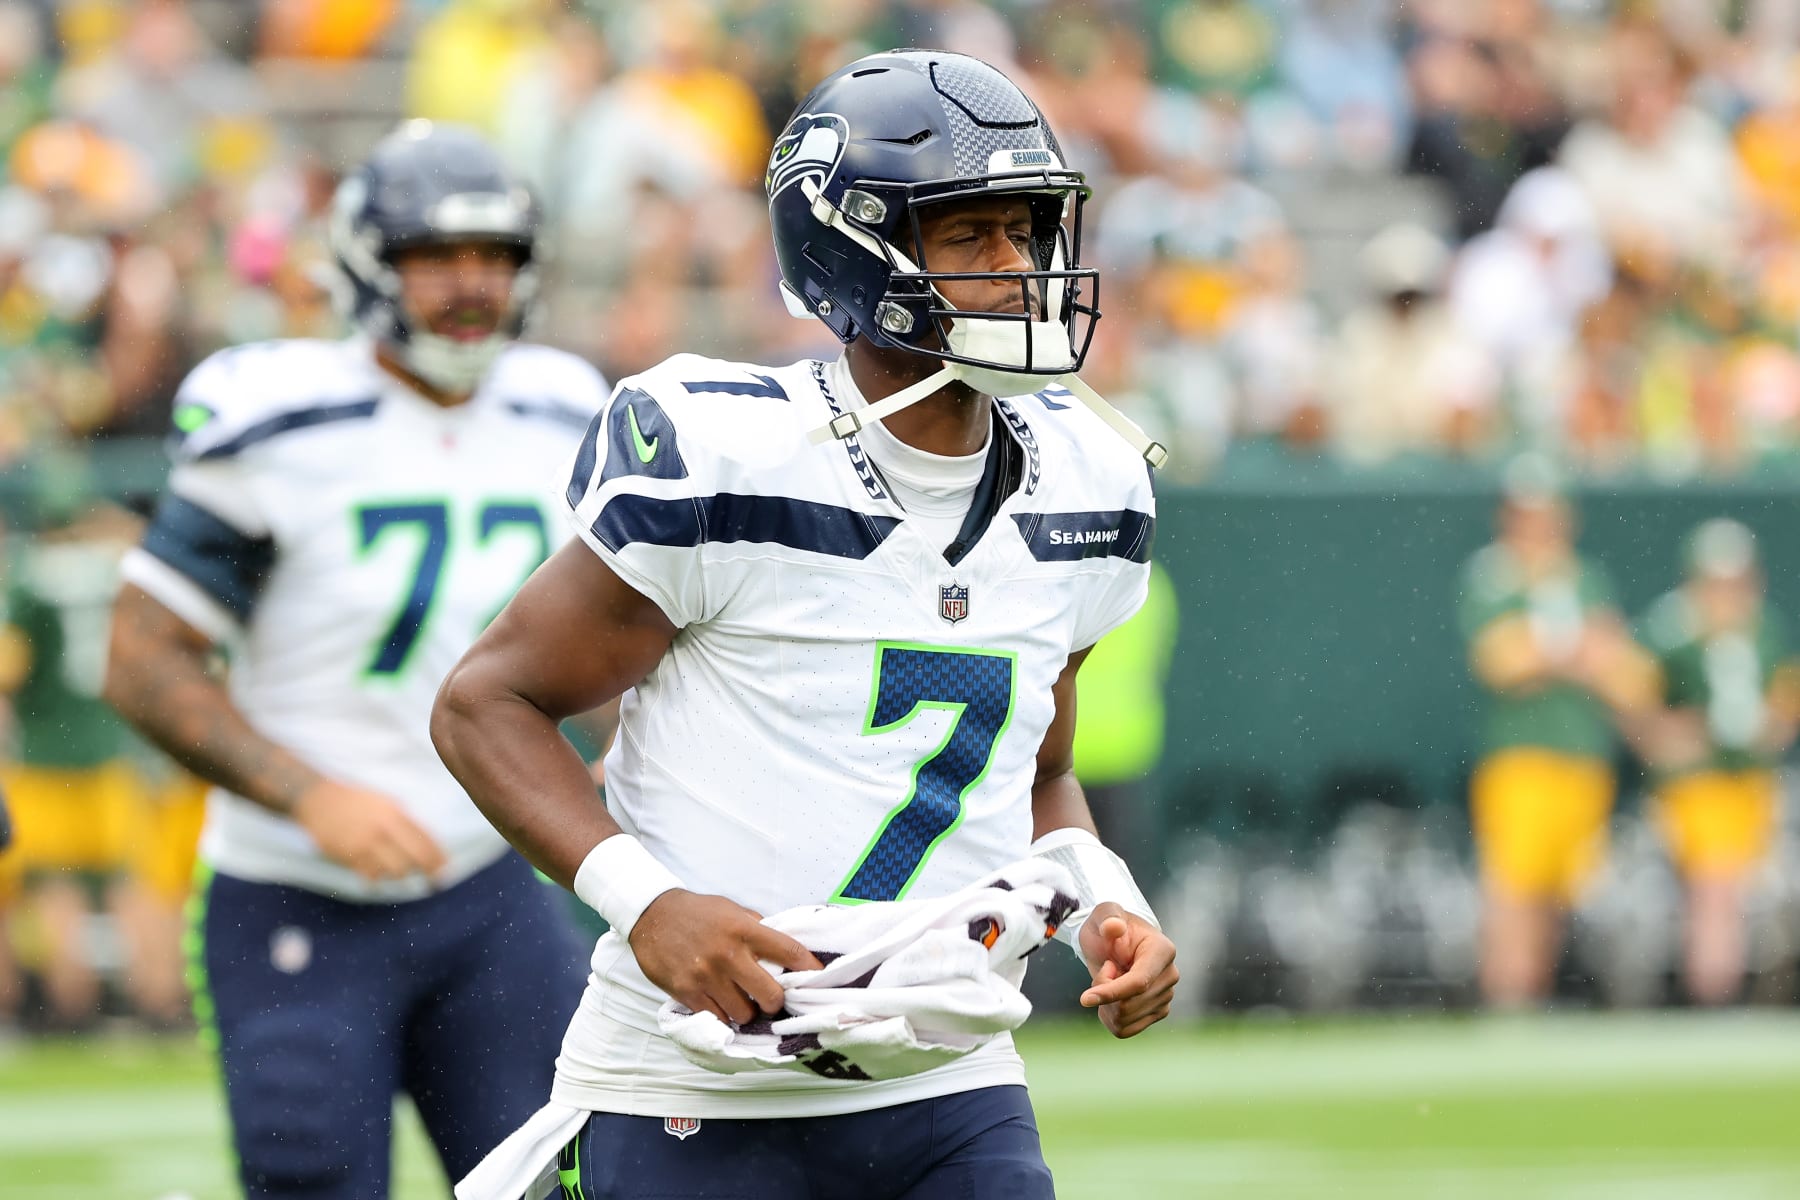 Monday Night Football NFL DFS picks: Top lineup for Seahawks vs. Broncos  includes Javonte Williams, Russell Wilson, and DeeJay Dallas